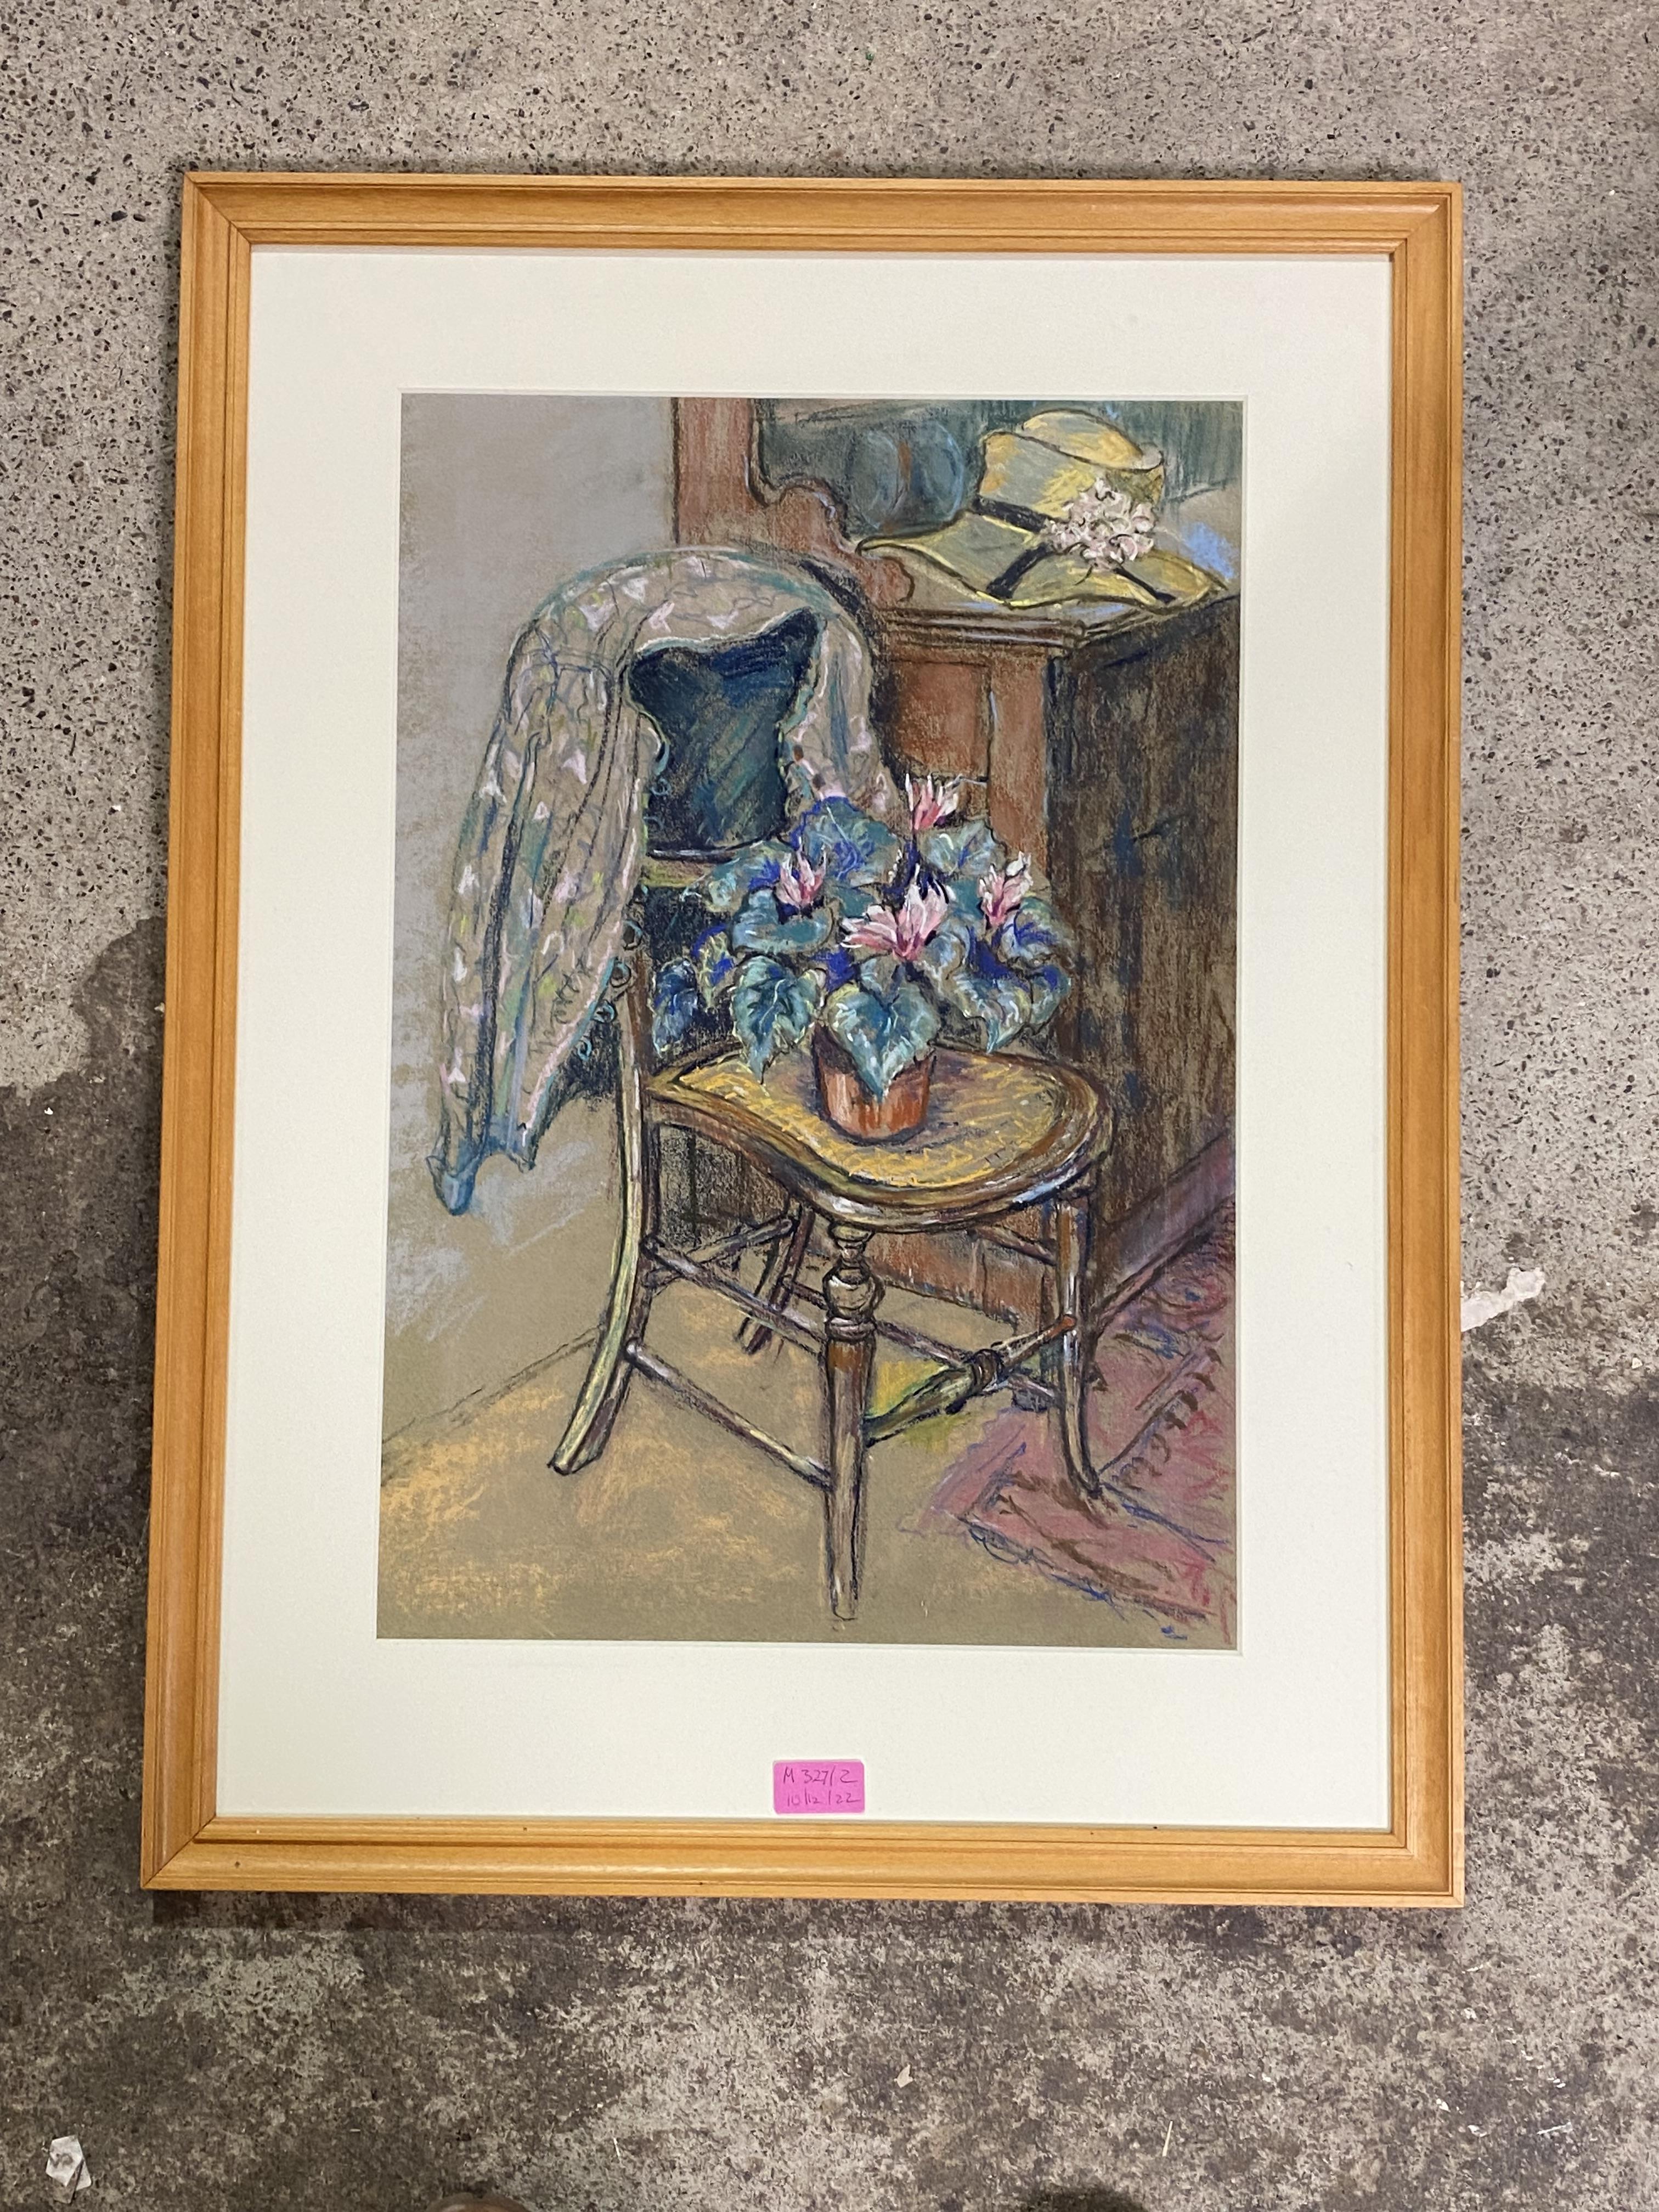 20th Century School, The Bedroom Chair, pastel, unsigned, framed. 53cm by 37cm - Image 2 of 2